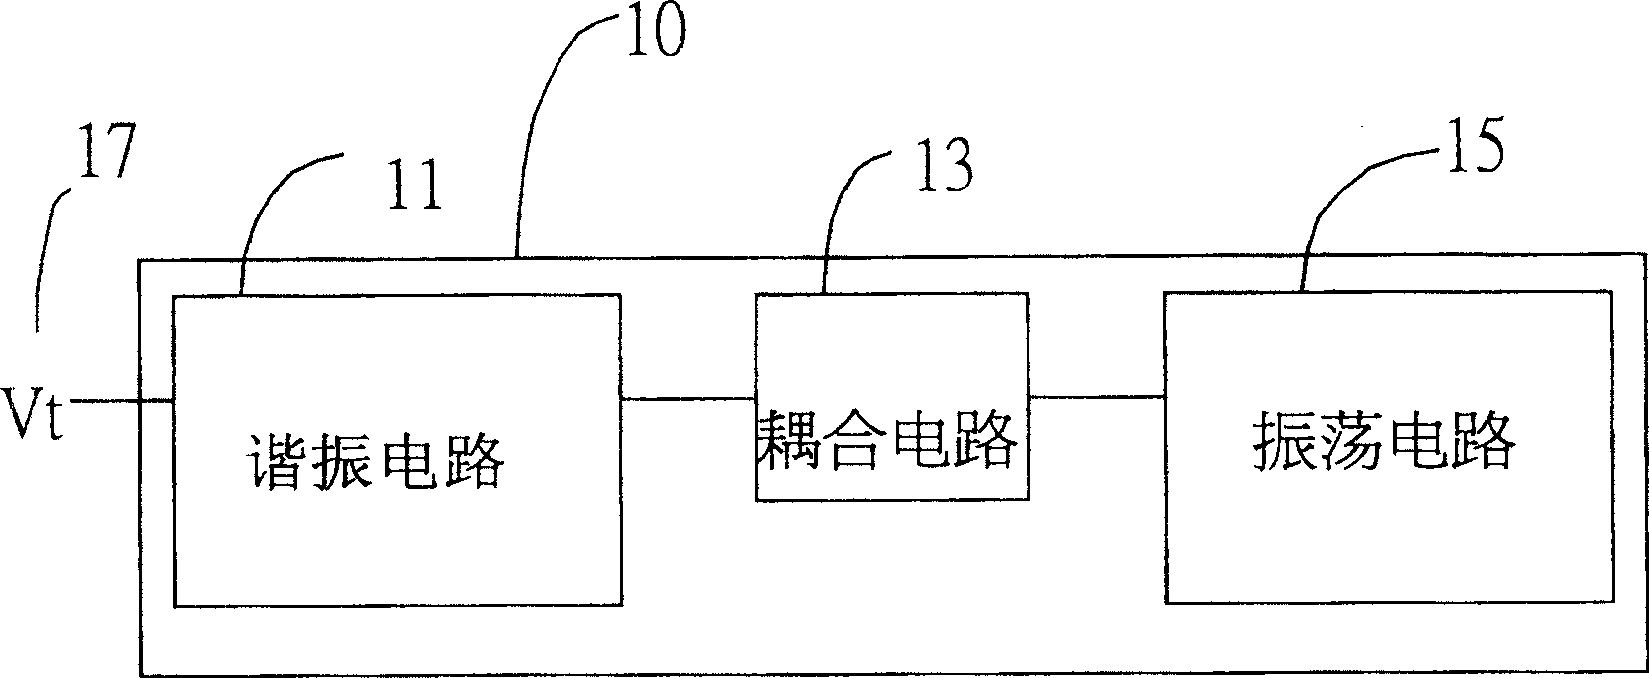 Electronic device with trimming voltage controlled oscillator